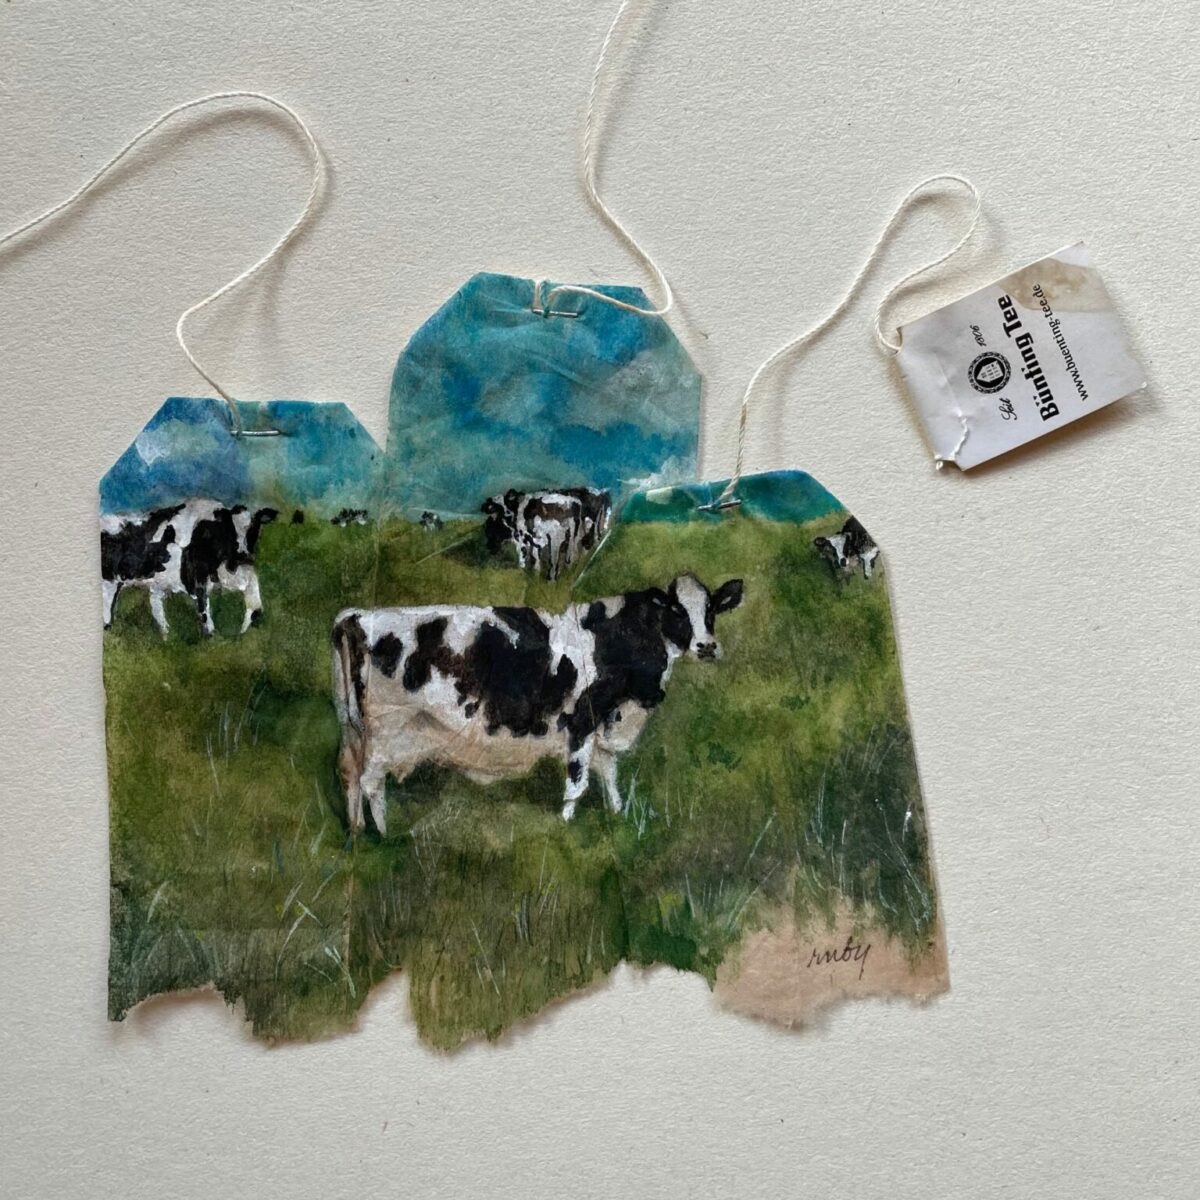 Gorgeous Miniature Watercolors Painted On Used Teabags By Ruby Silvious 18